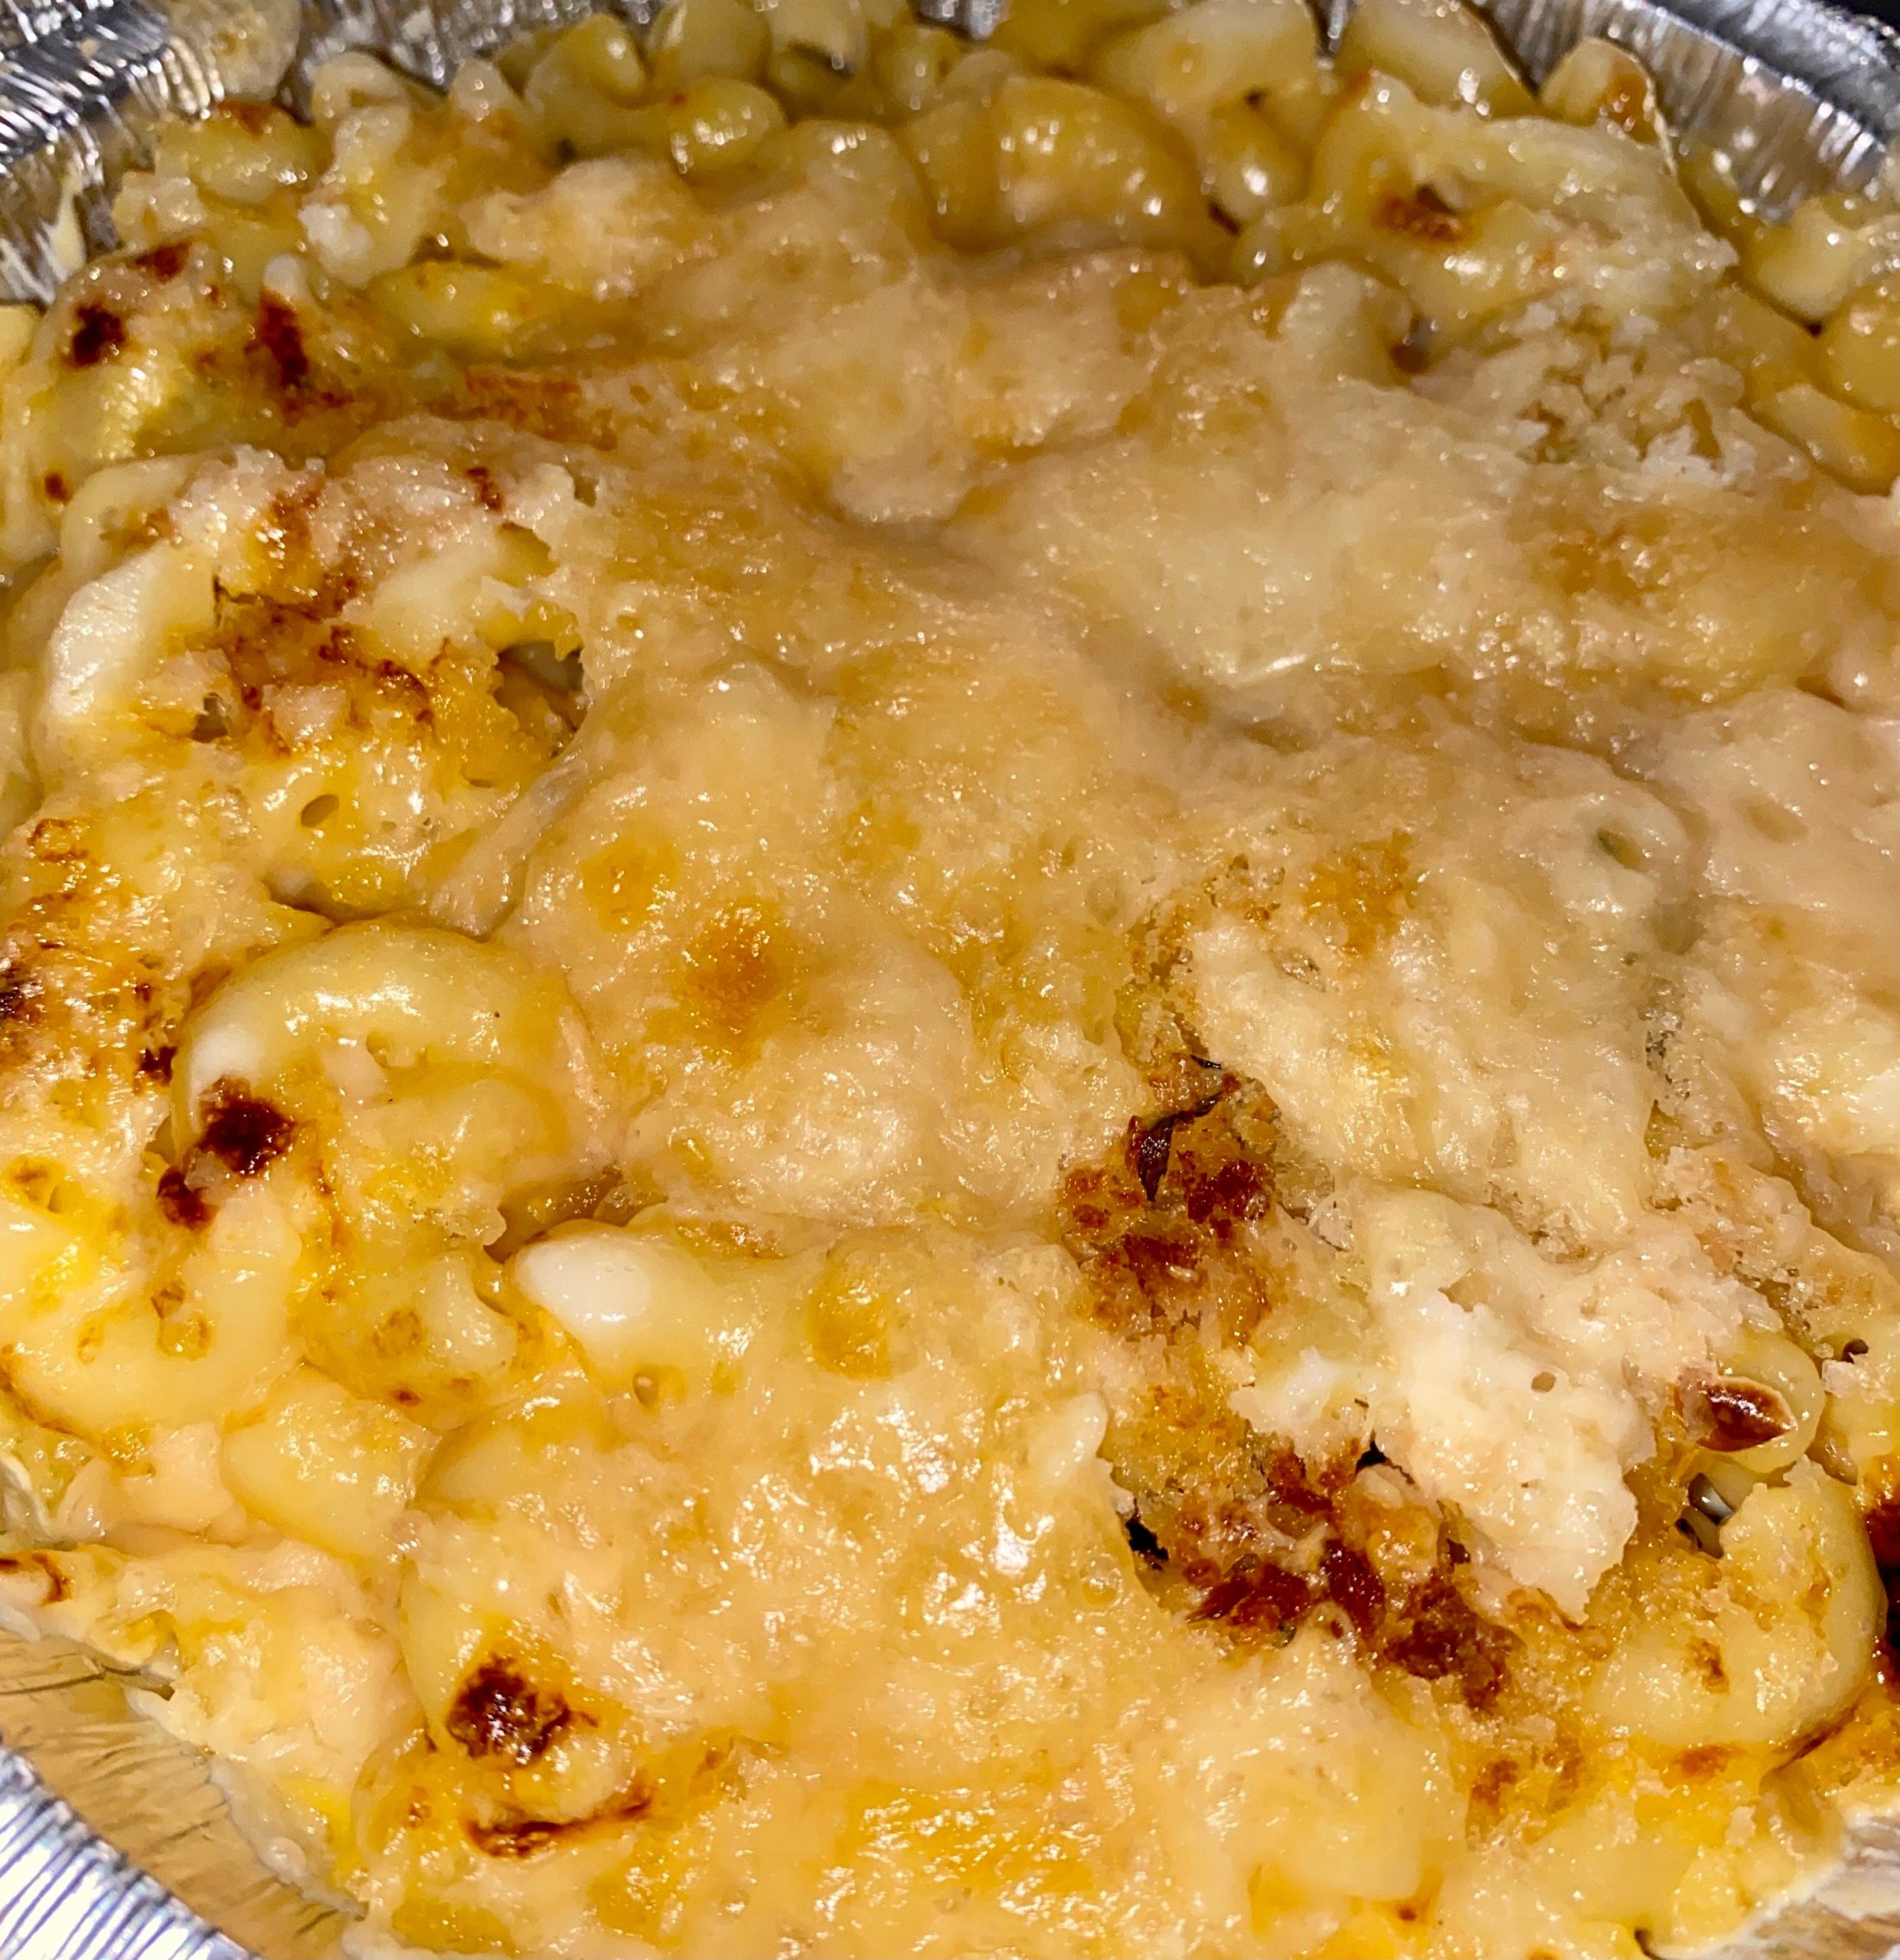 Truffle Mac and Cheese from Saddle Ranch